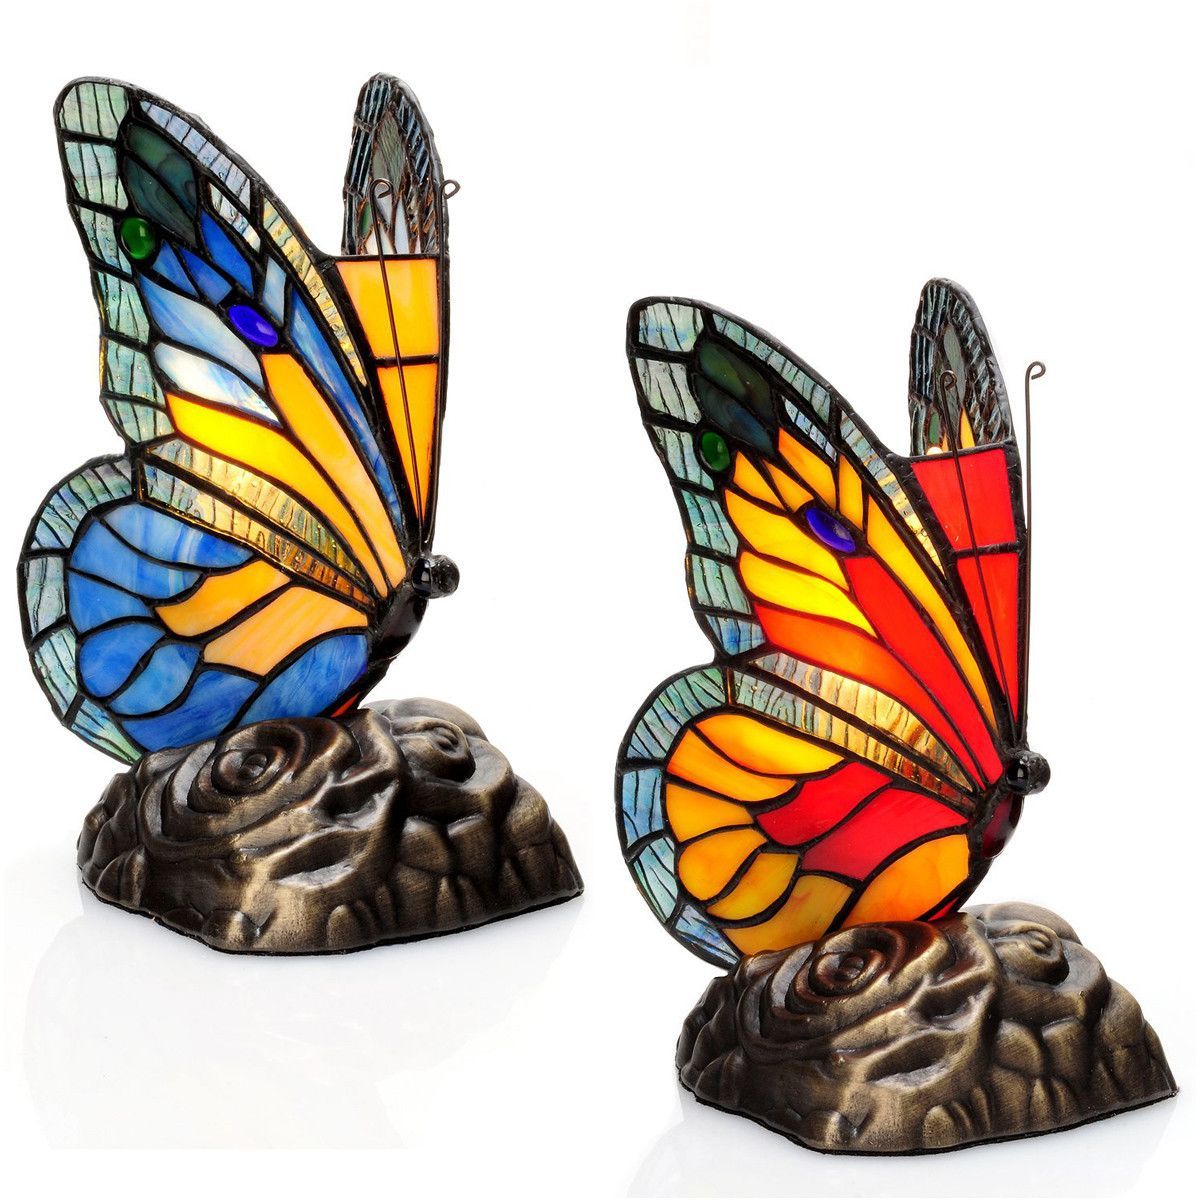 tiffany butterfly stained glass touch table lamp with novelty accent river goods blue red set small gray side coffee calgary teak dining very nightstand decorative wine rack